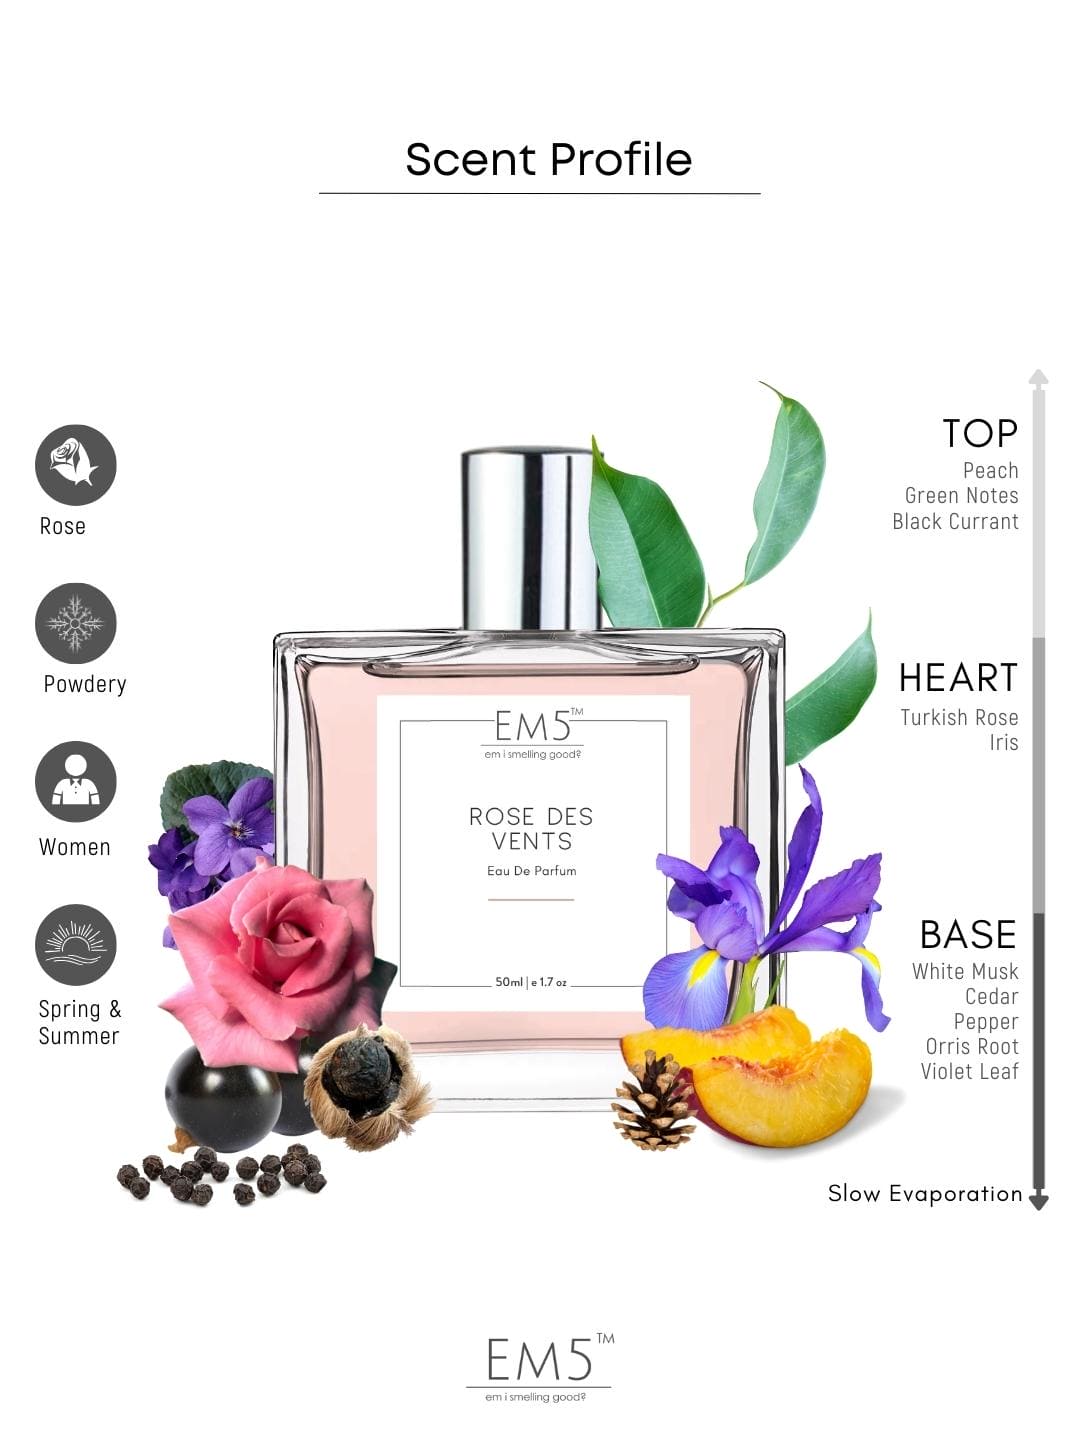 obsessed with rose des vents🥰 what's your fav perfume? #perfume